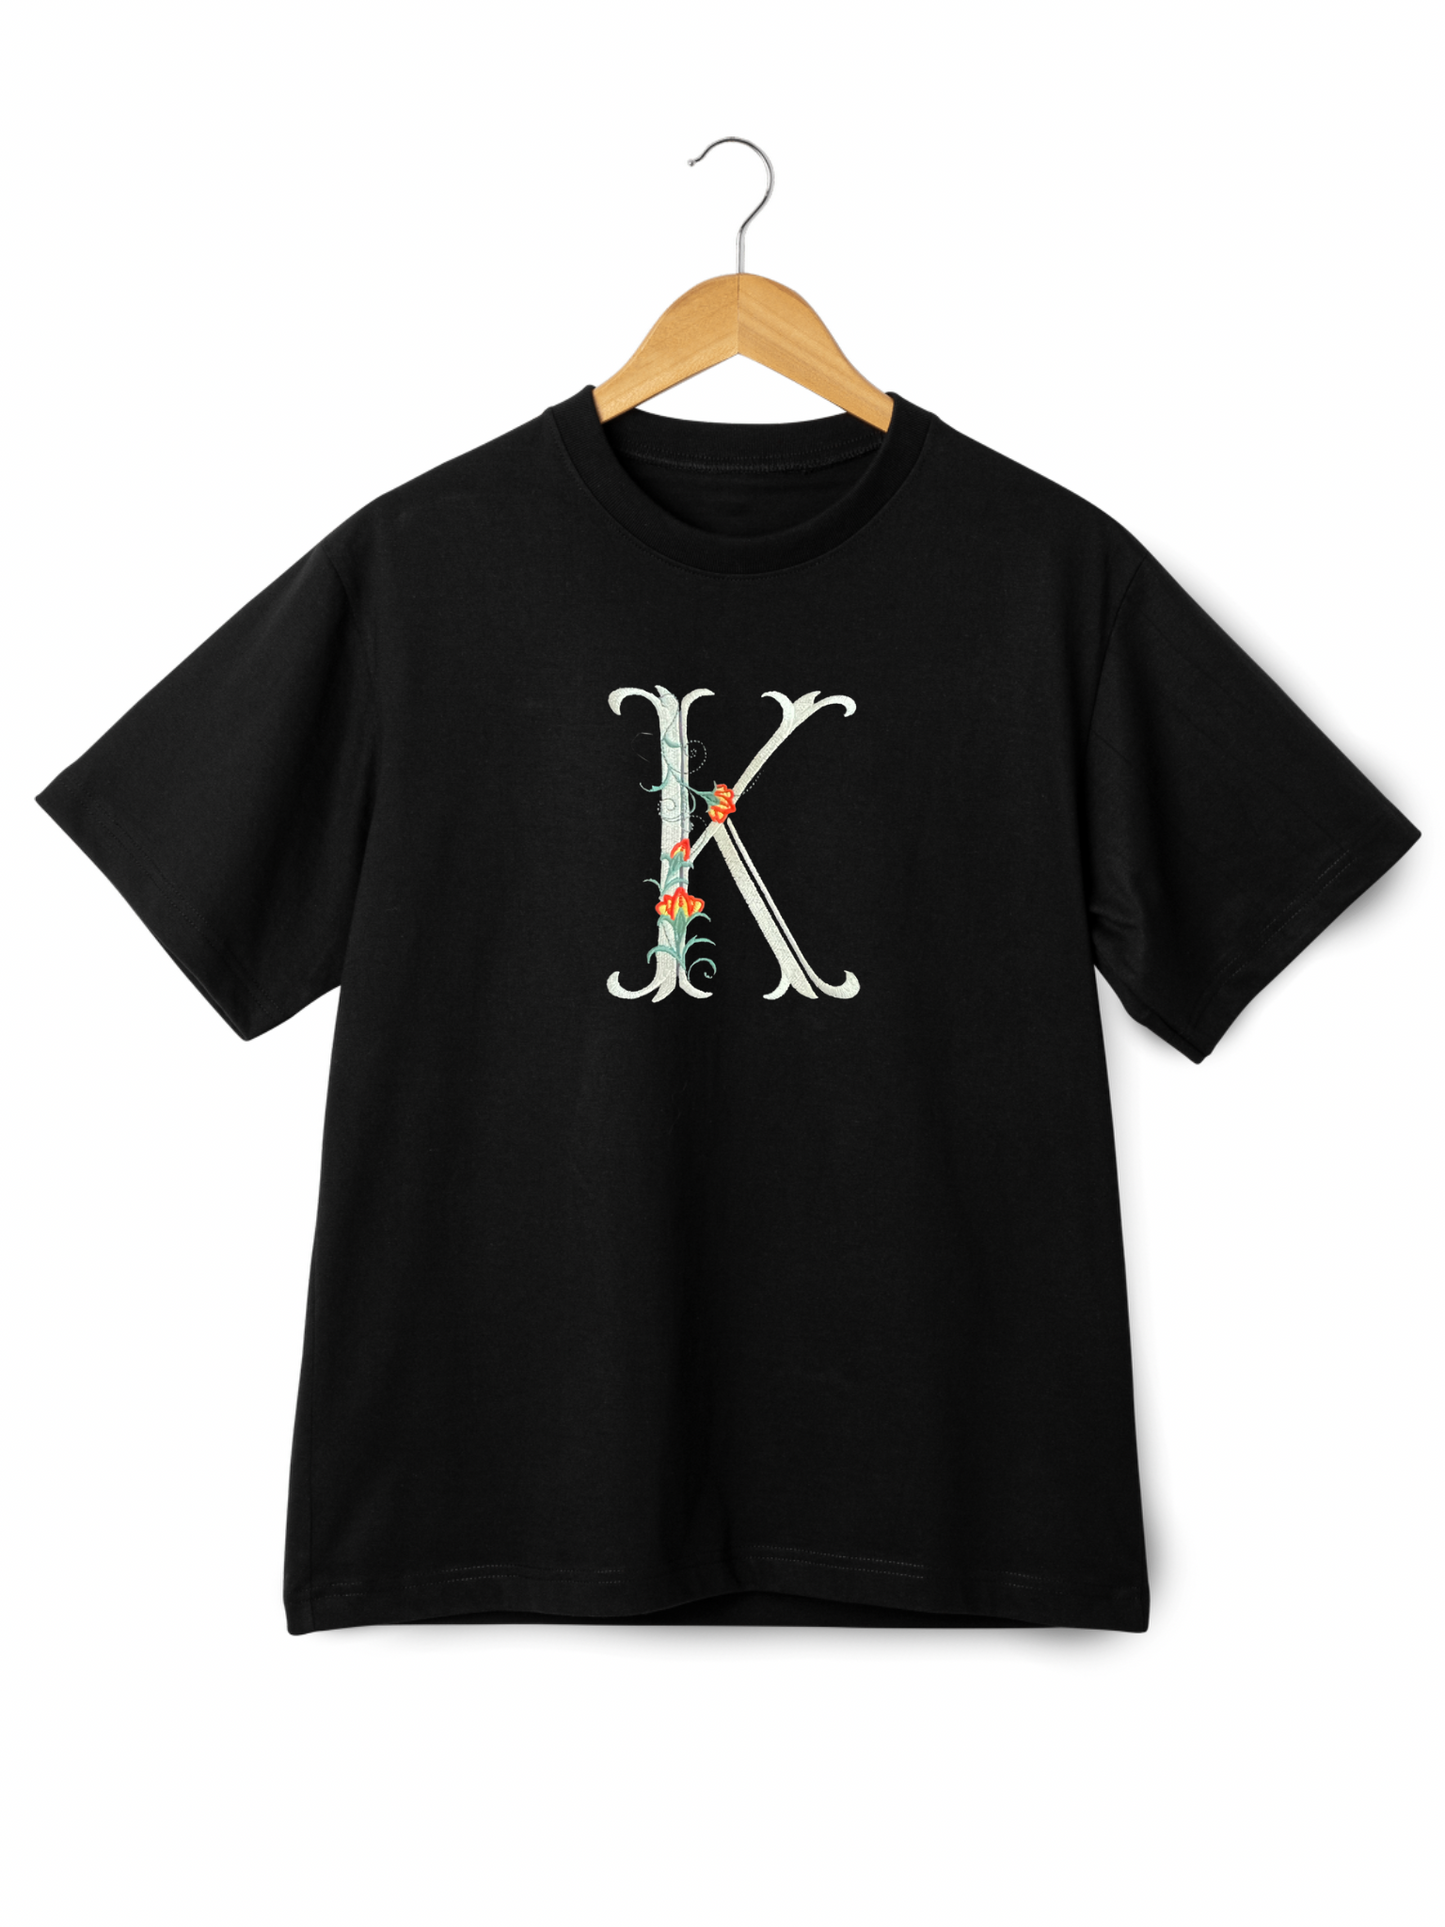 Personalised Embroidered Flower Initial T-shirt